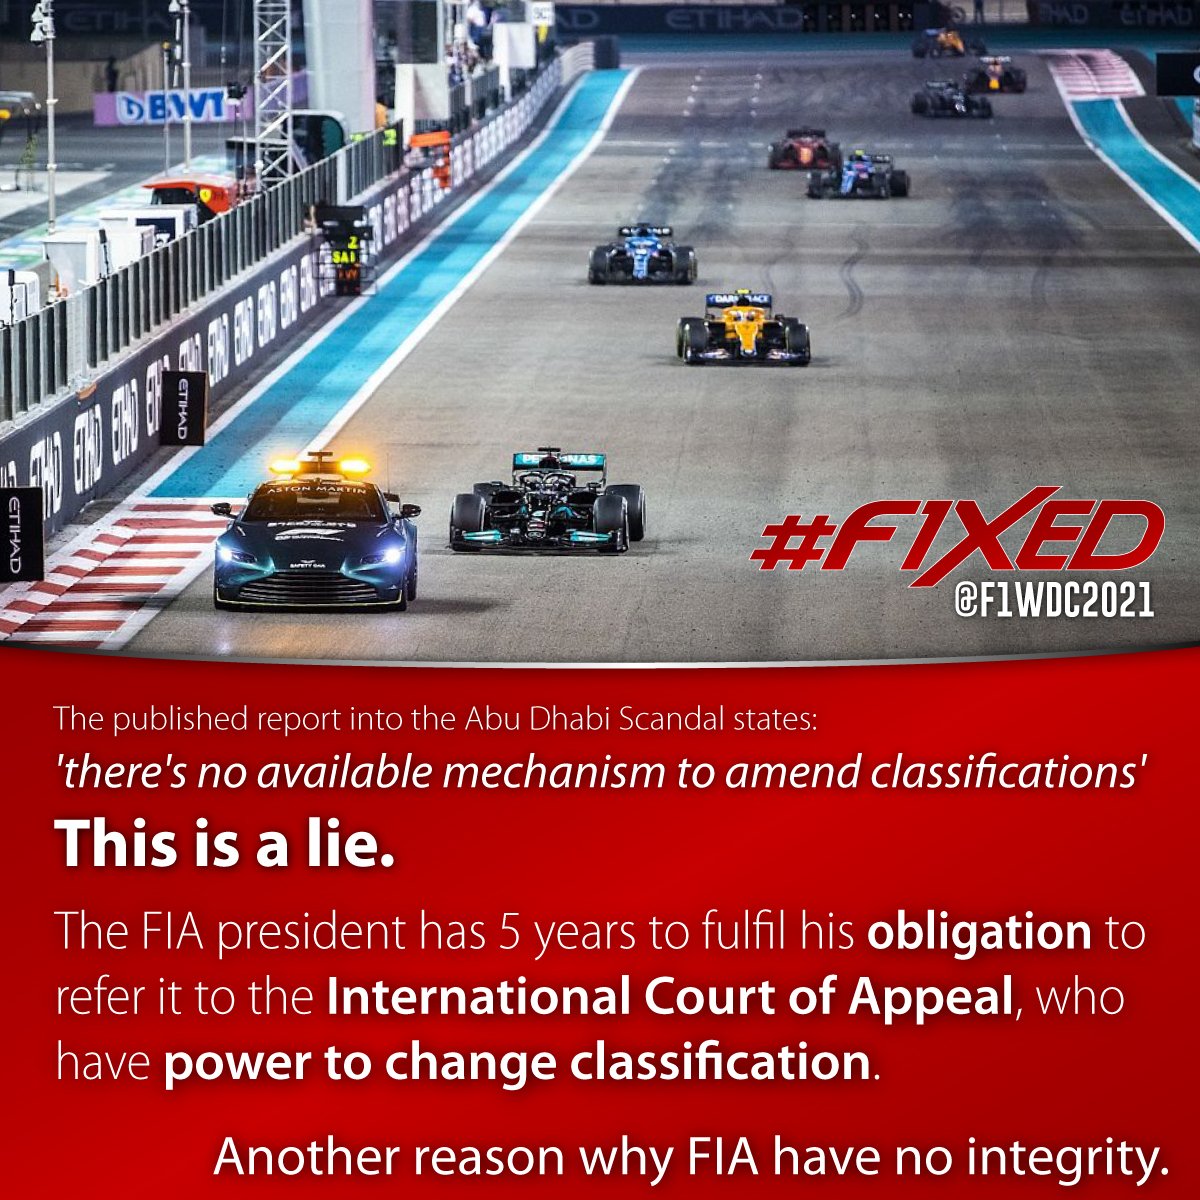 My big question for @MercedesAMGF1 @LewisHamilton @SkySportsF1 @andrewbensonf1 is... Why, when an #F1 fan can work out that @fia Judicial & Disciplinary article 9.1.1c&d allow #AD2021 to be referred to ICA without the need for an appeal from a team, do Toto, Lewis and everyone